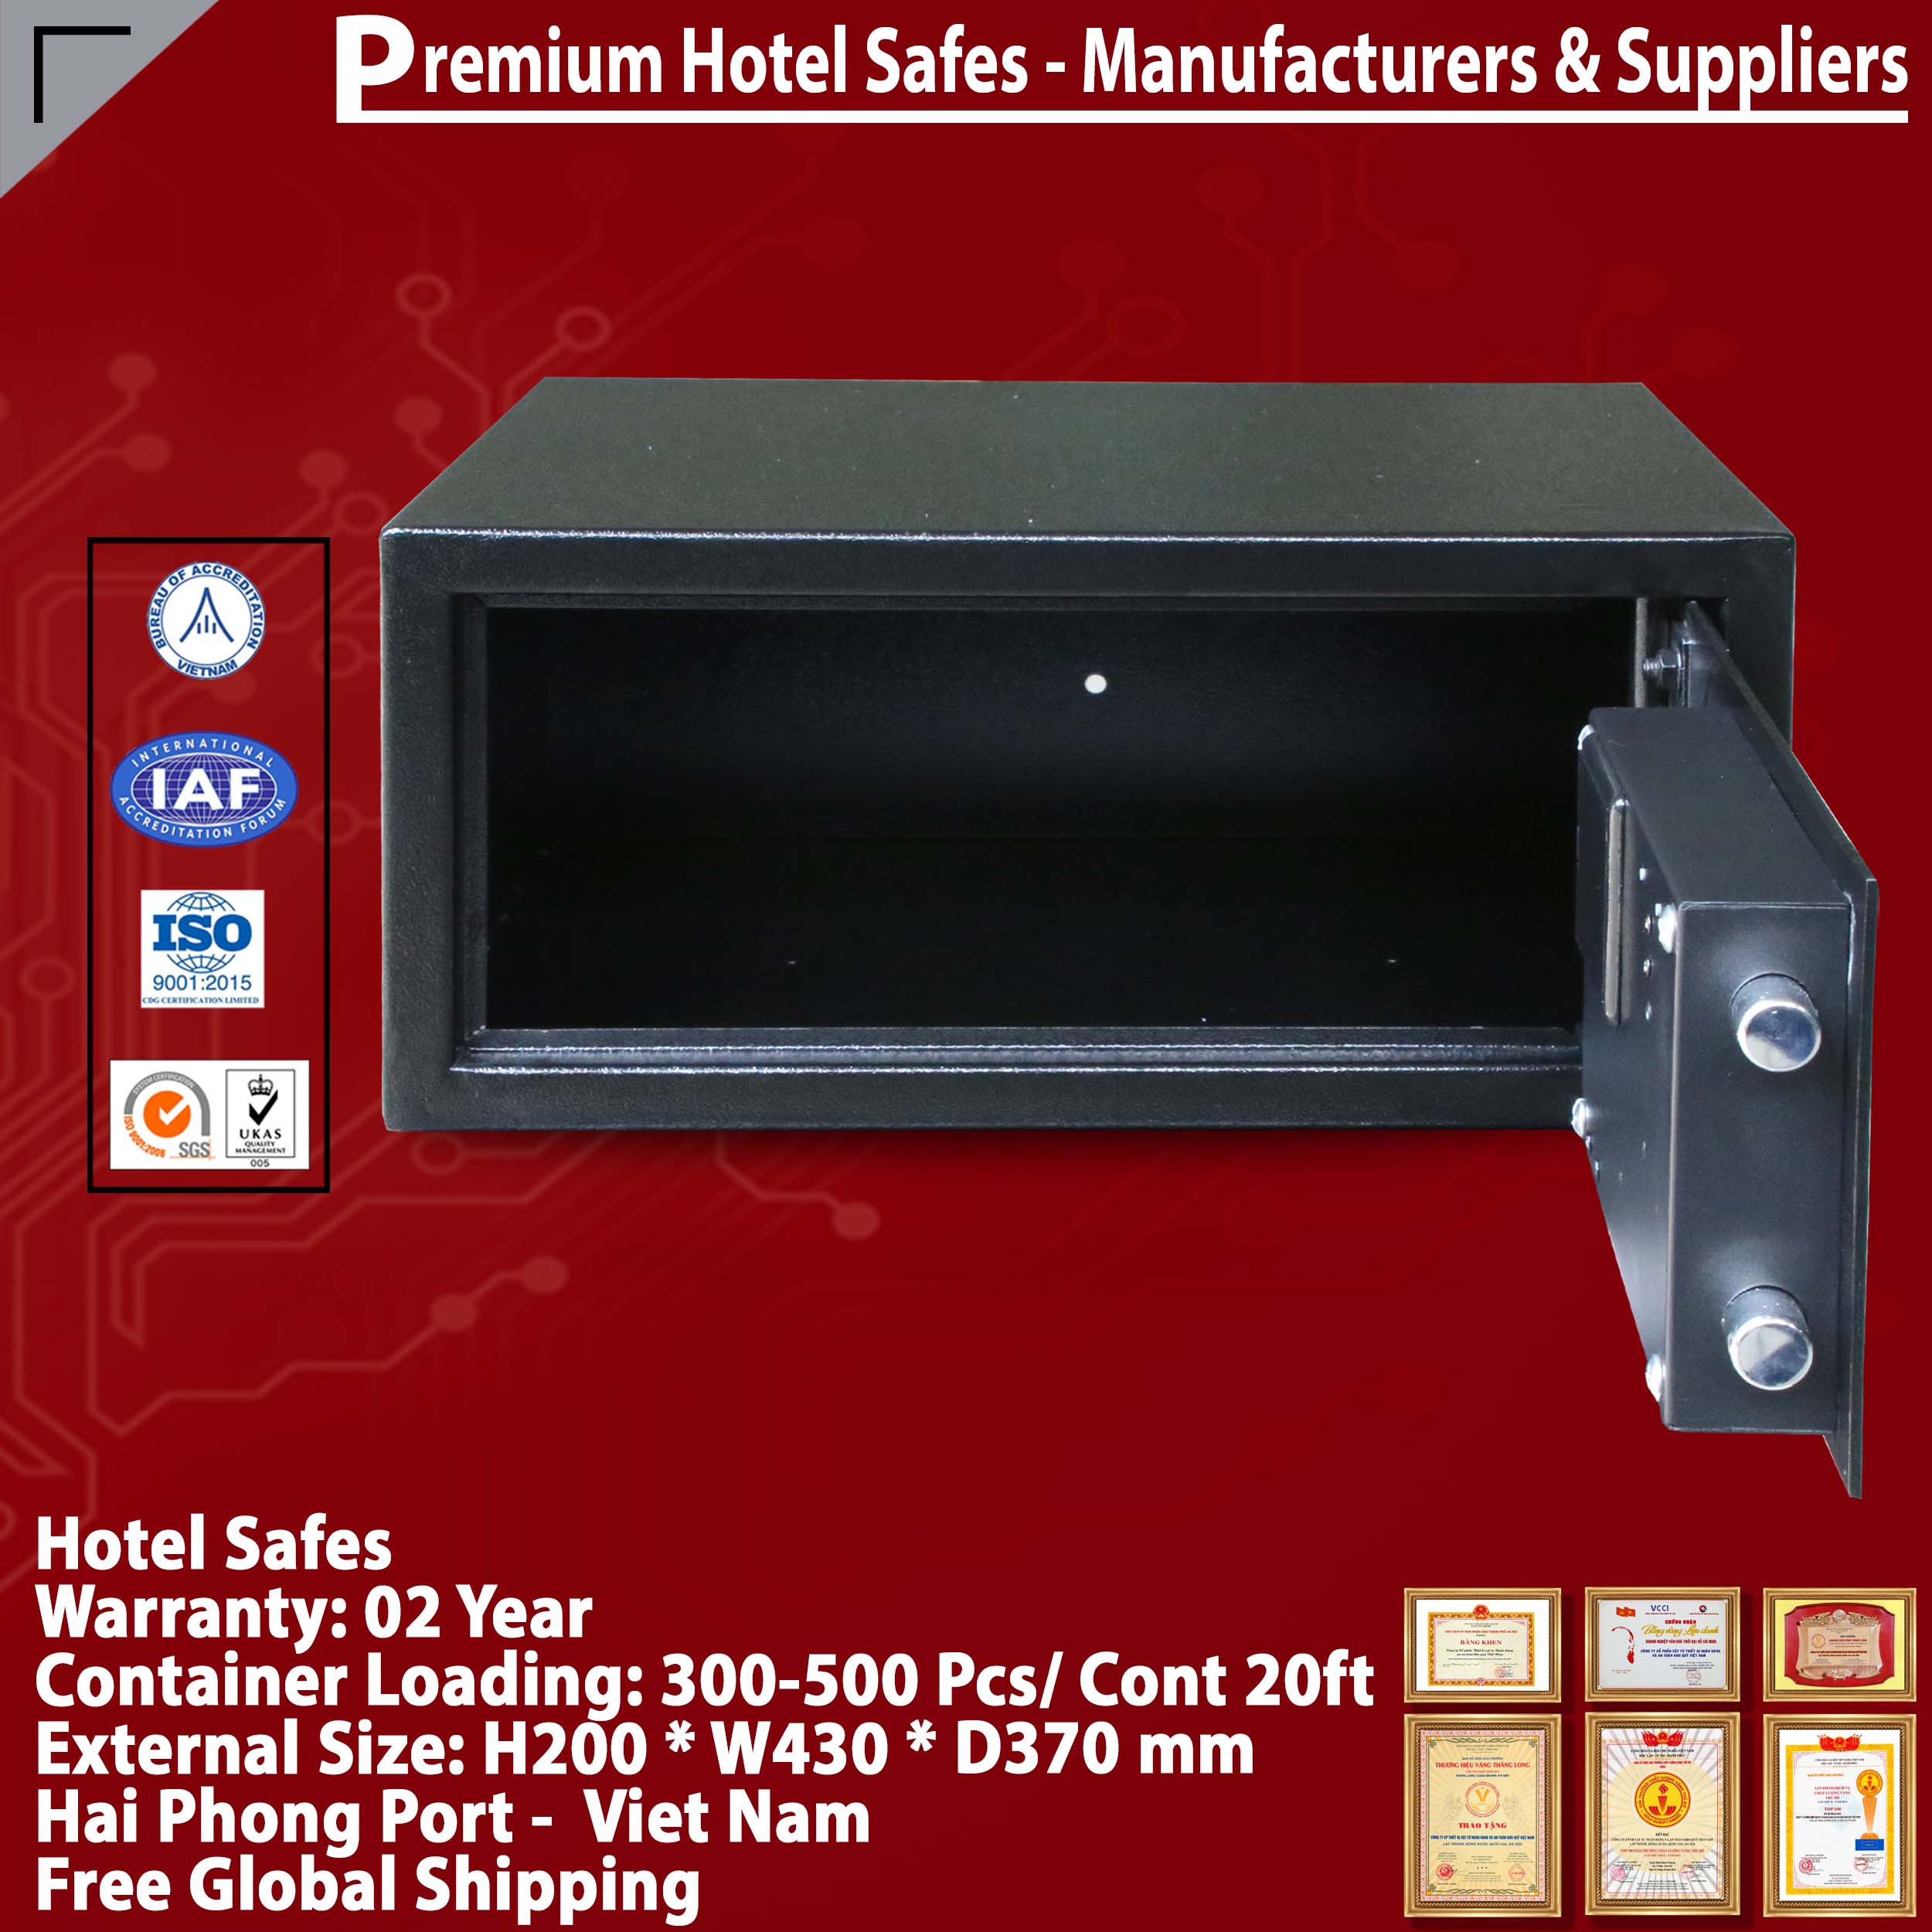 Fireproof Best Sellers In Hotel Safes Made In Viet Nam